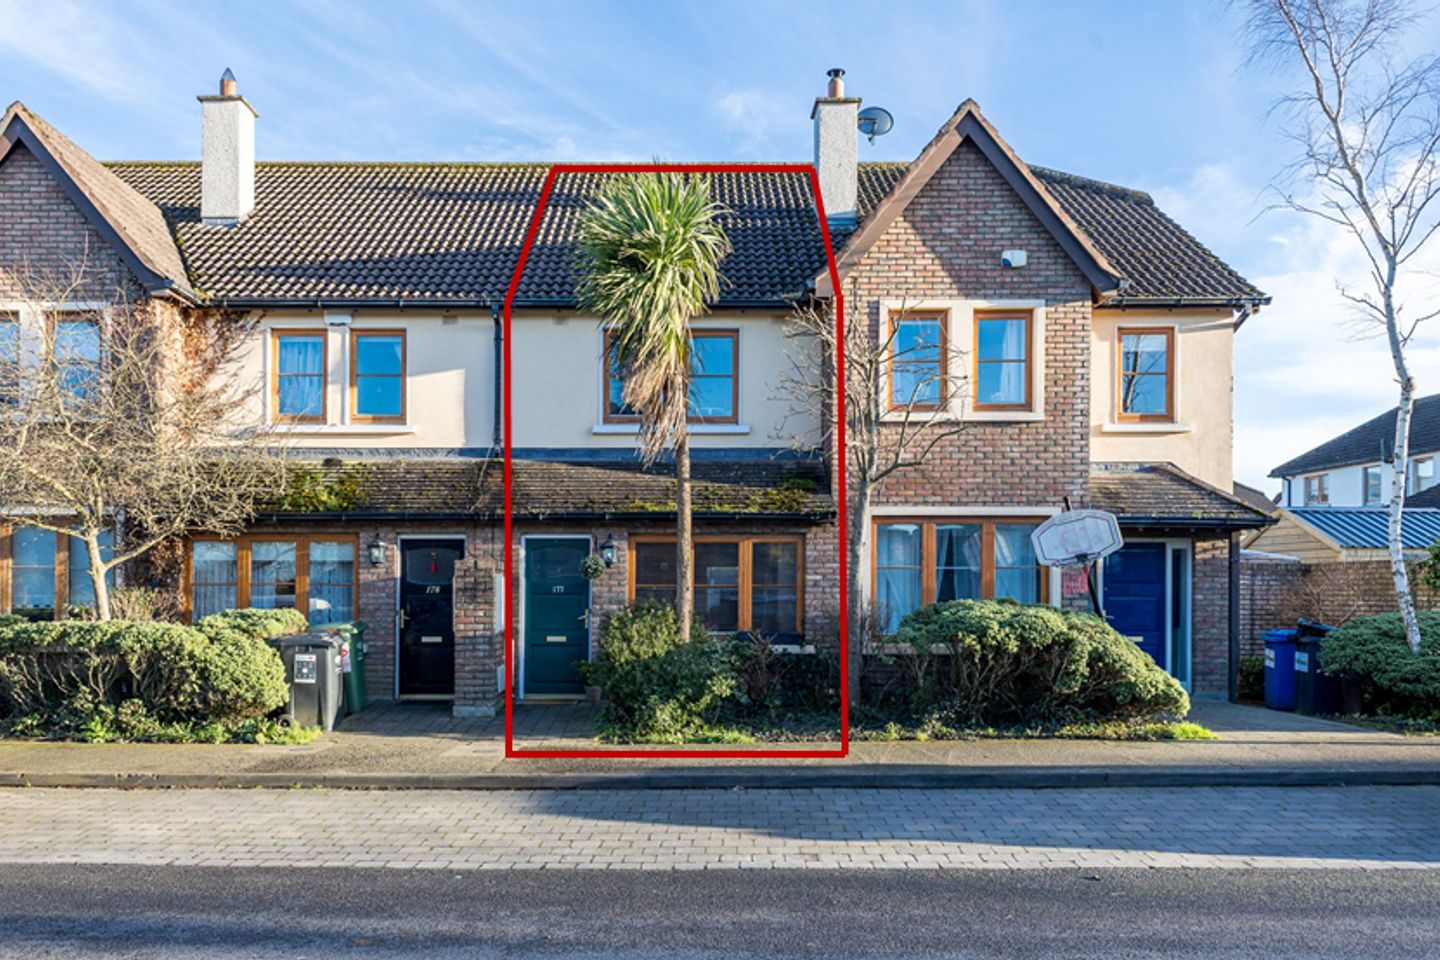 177 Steeplechase Green, Ratoath, Co. Meath, A85EE73